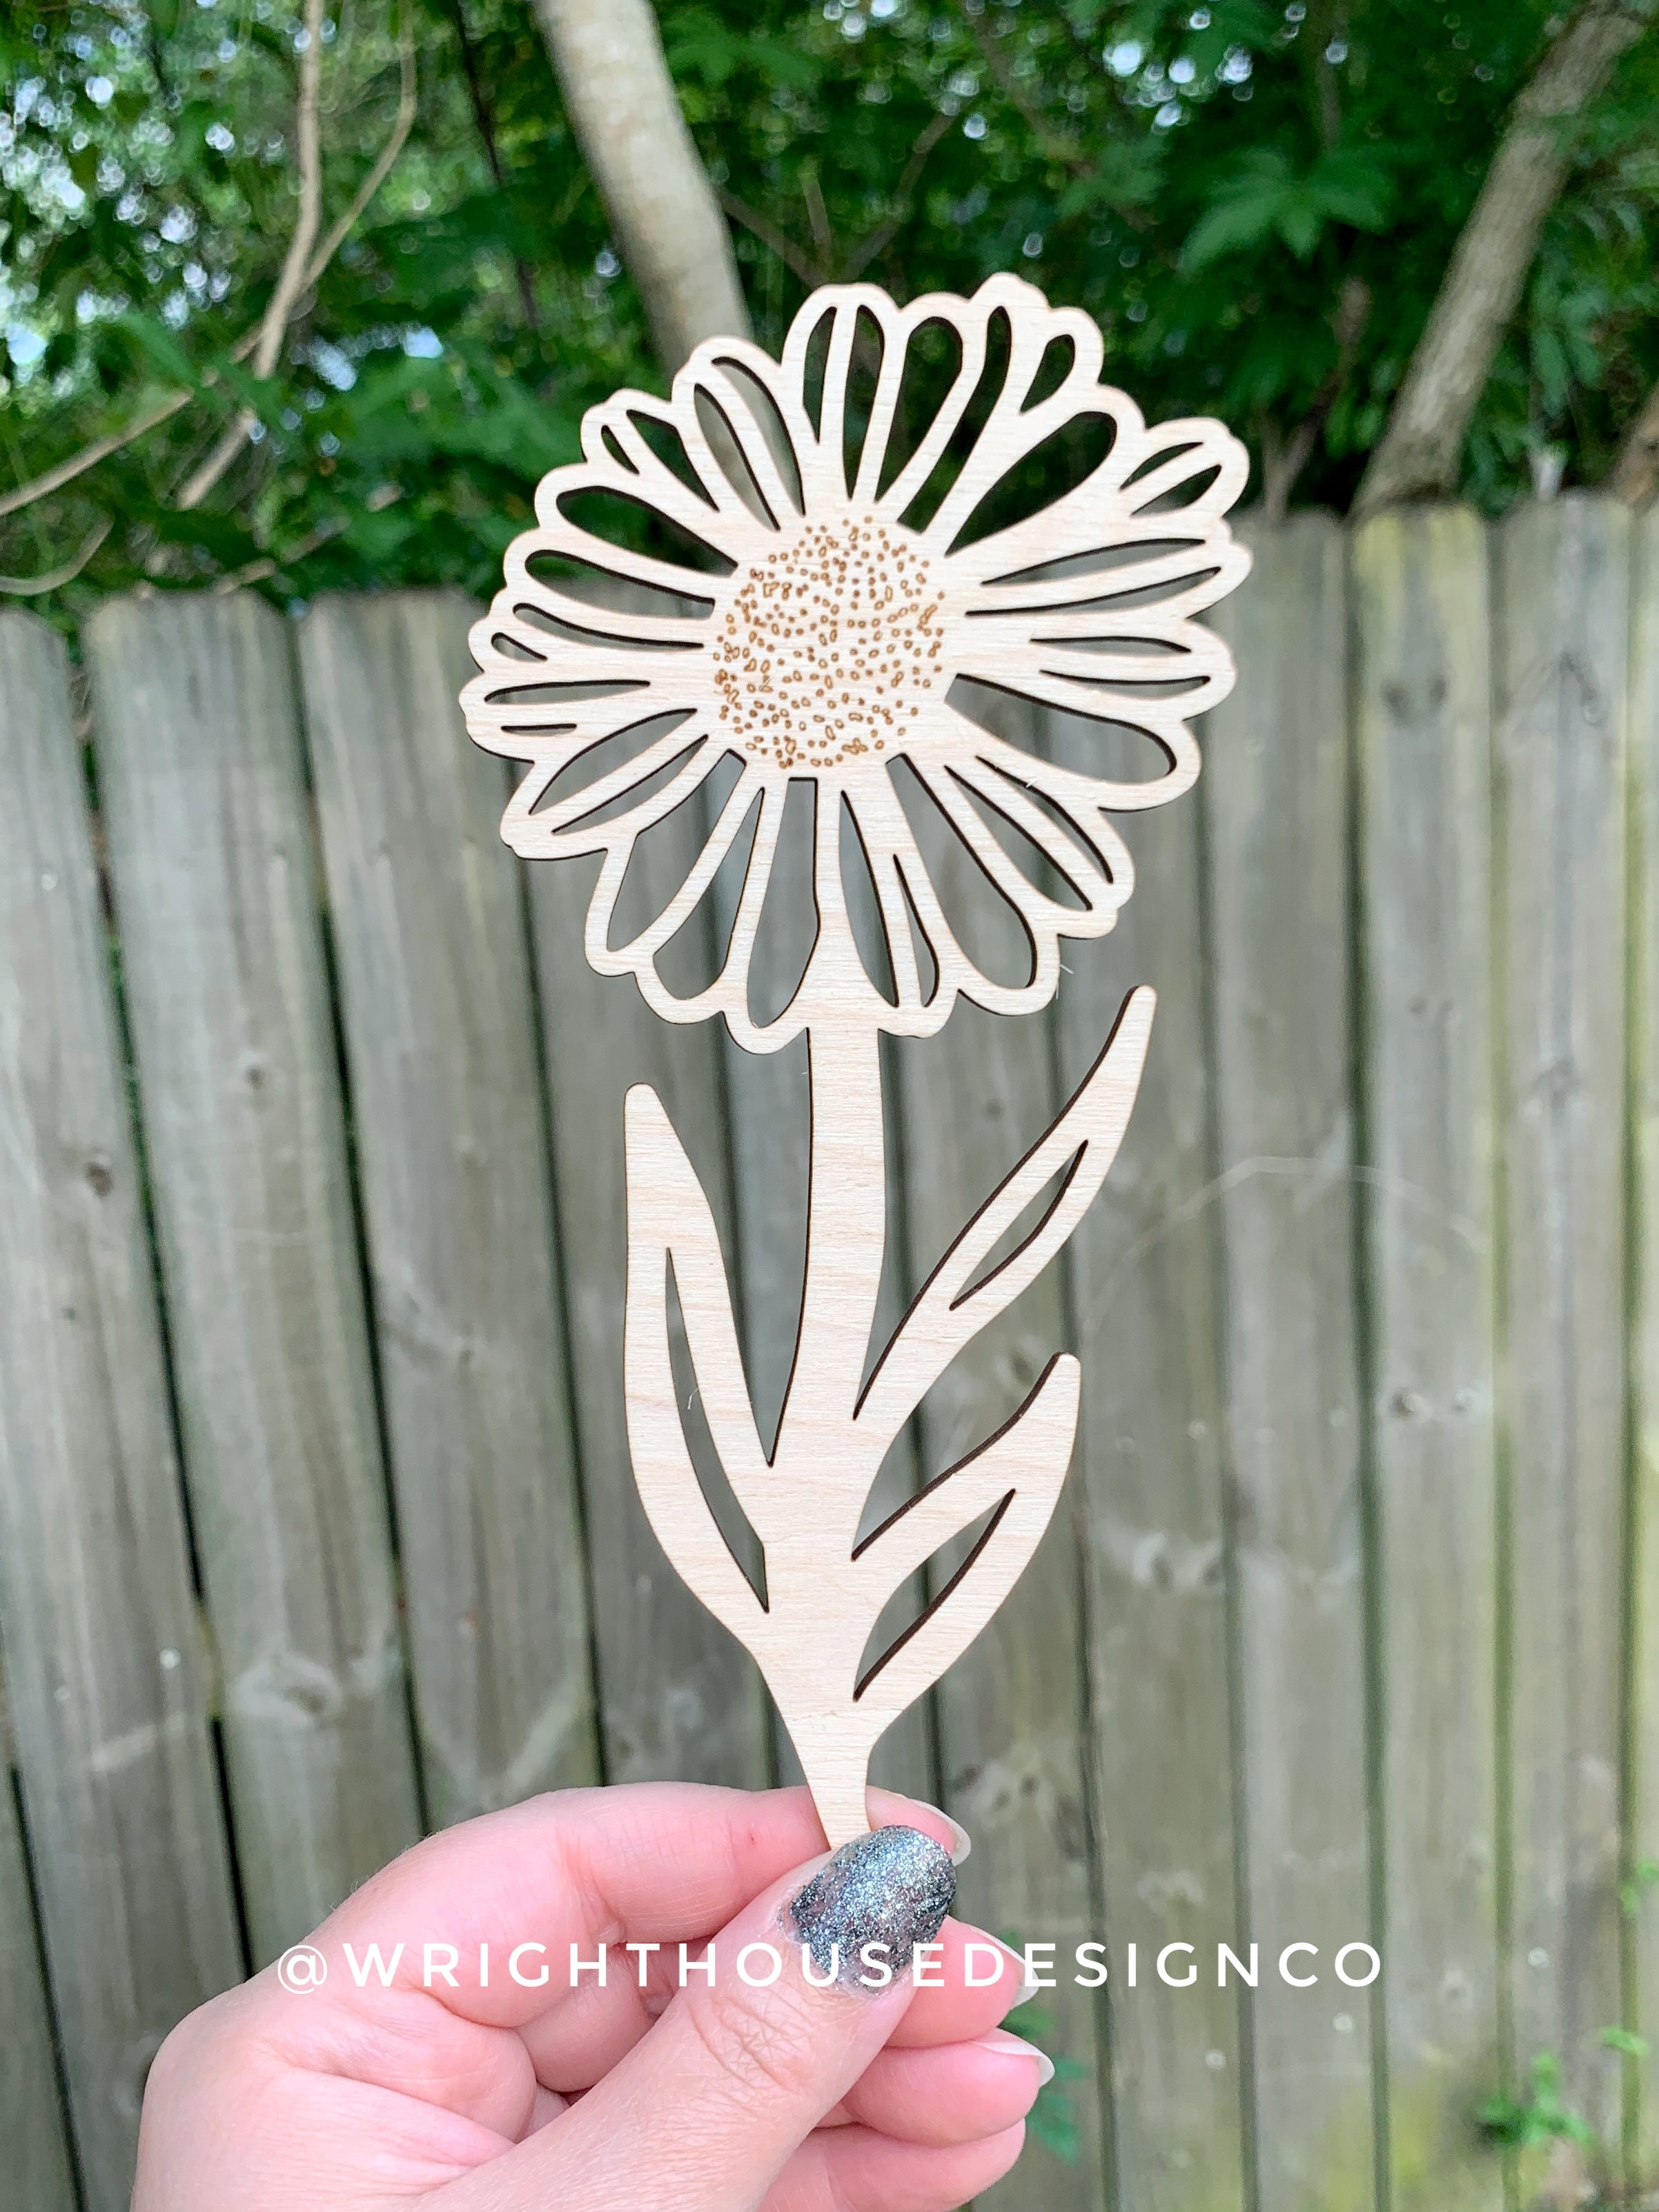 Laser Cut Wooden Flowers - Decorative Flowers For Mom - Build a Bouquet for Mother’s Day